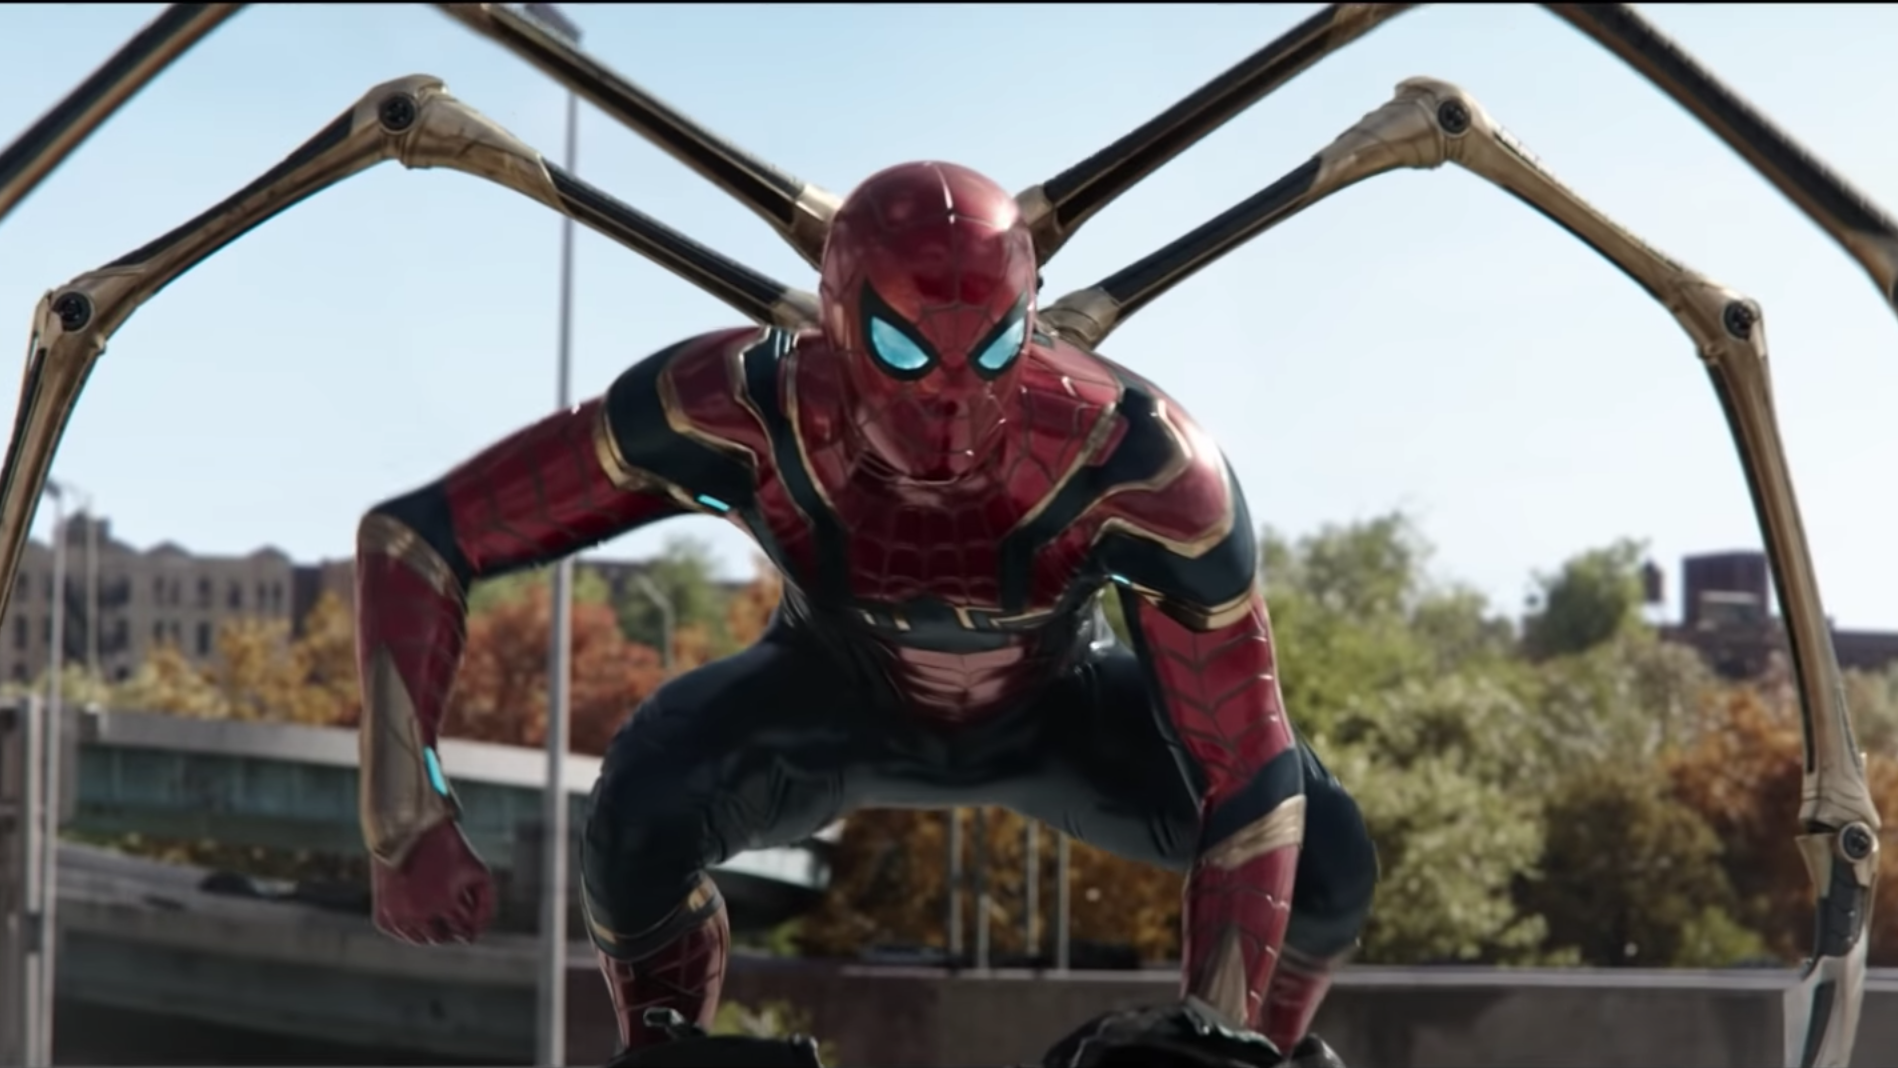 Spider-Man: No Way Home sets pandemic record with $50 million Thursday box office